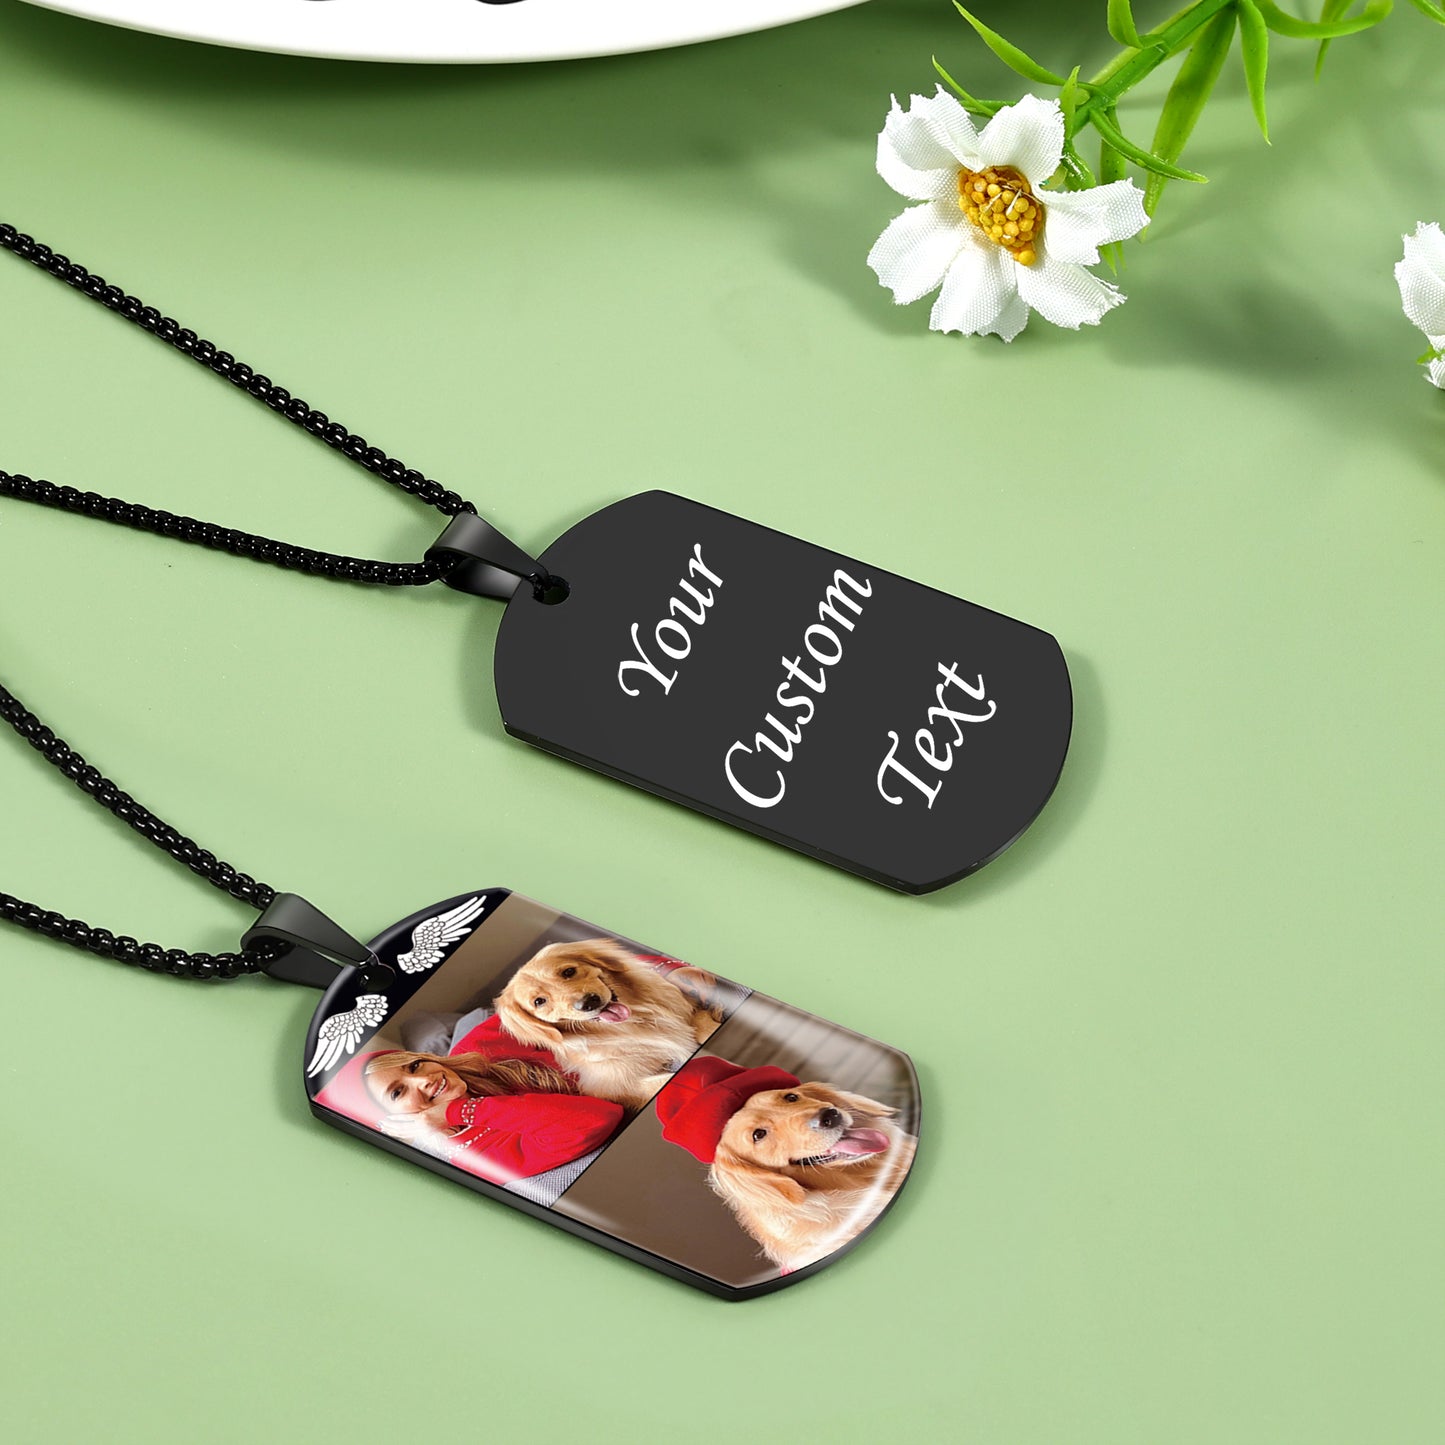 Fanery Sue Custom Multi Pictures Dog Tag Necklace for Men Women, Personalized Memorial Photo Necklace with Picture